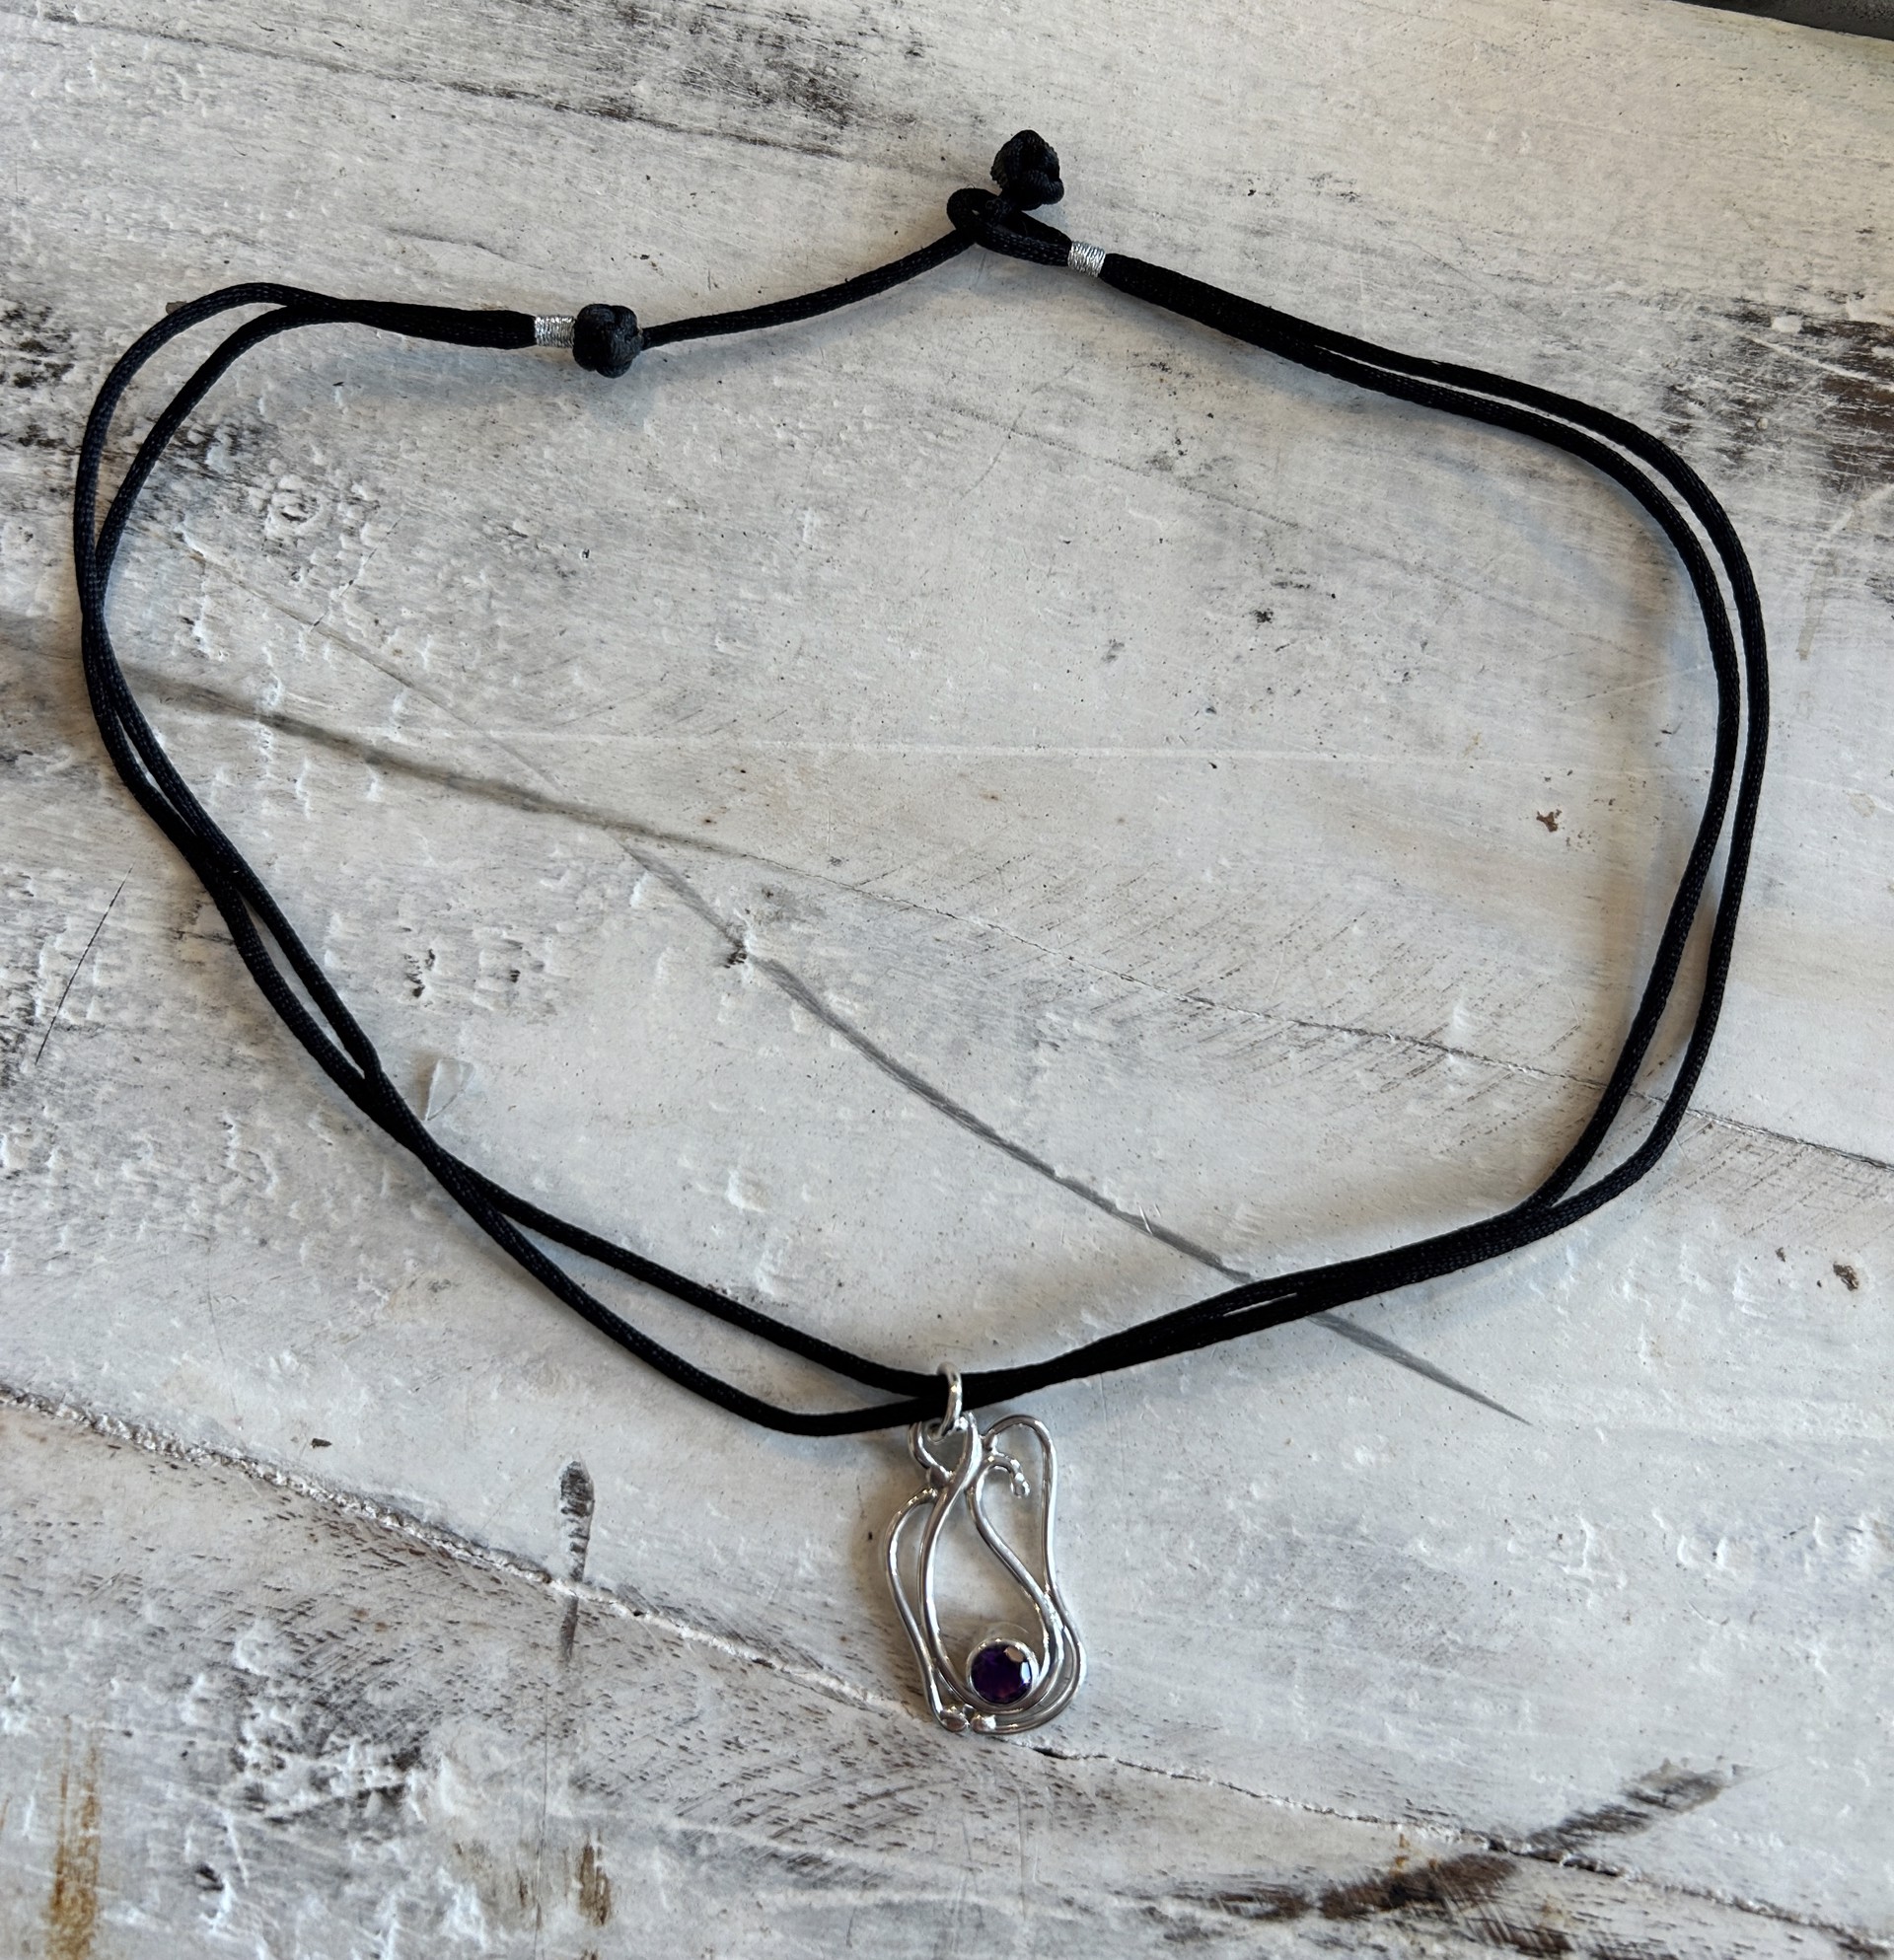 Necklace | Sterling Silver Freeform Design with Amethyst on Black Cord by Amy Shady